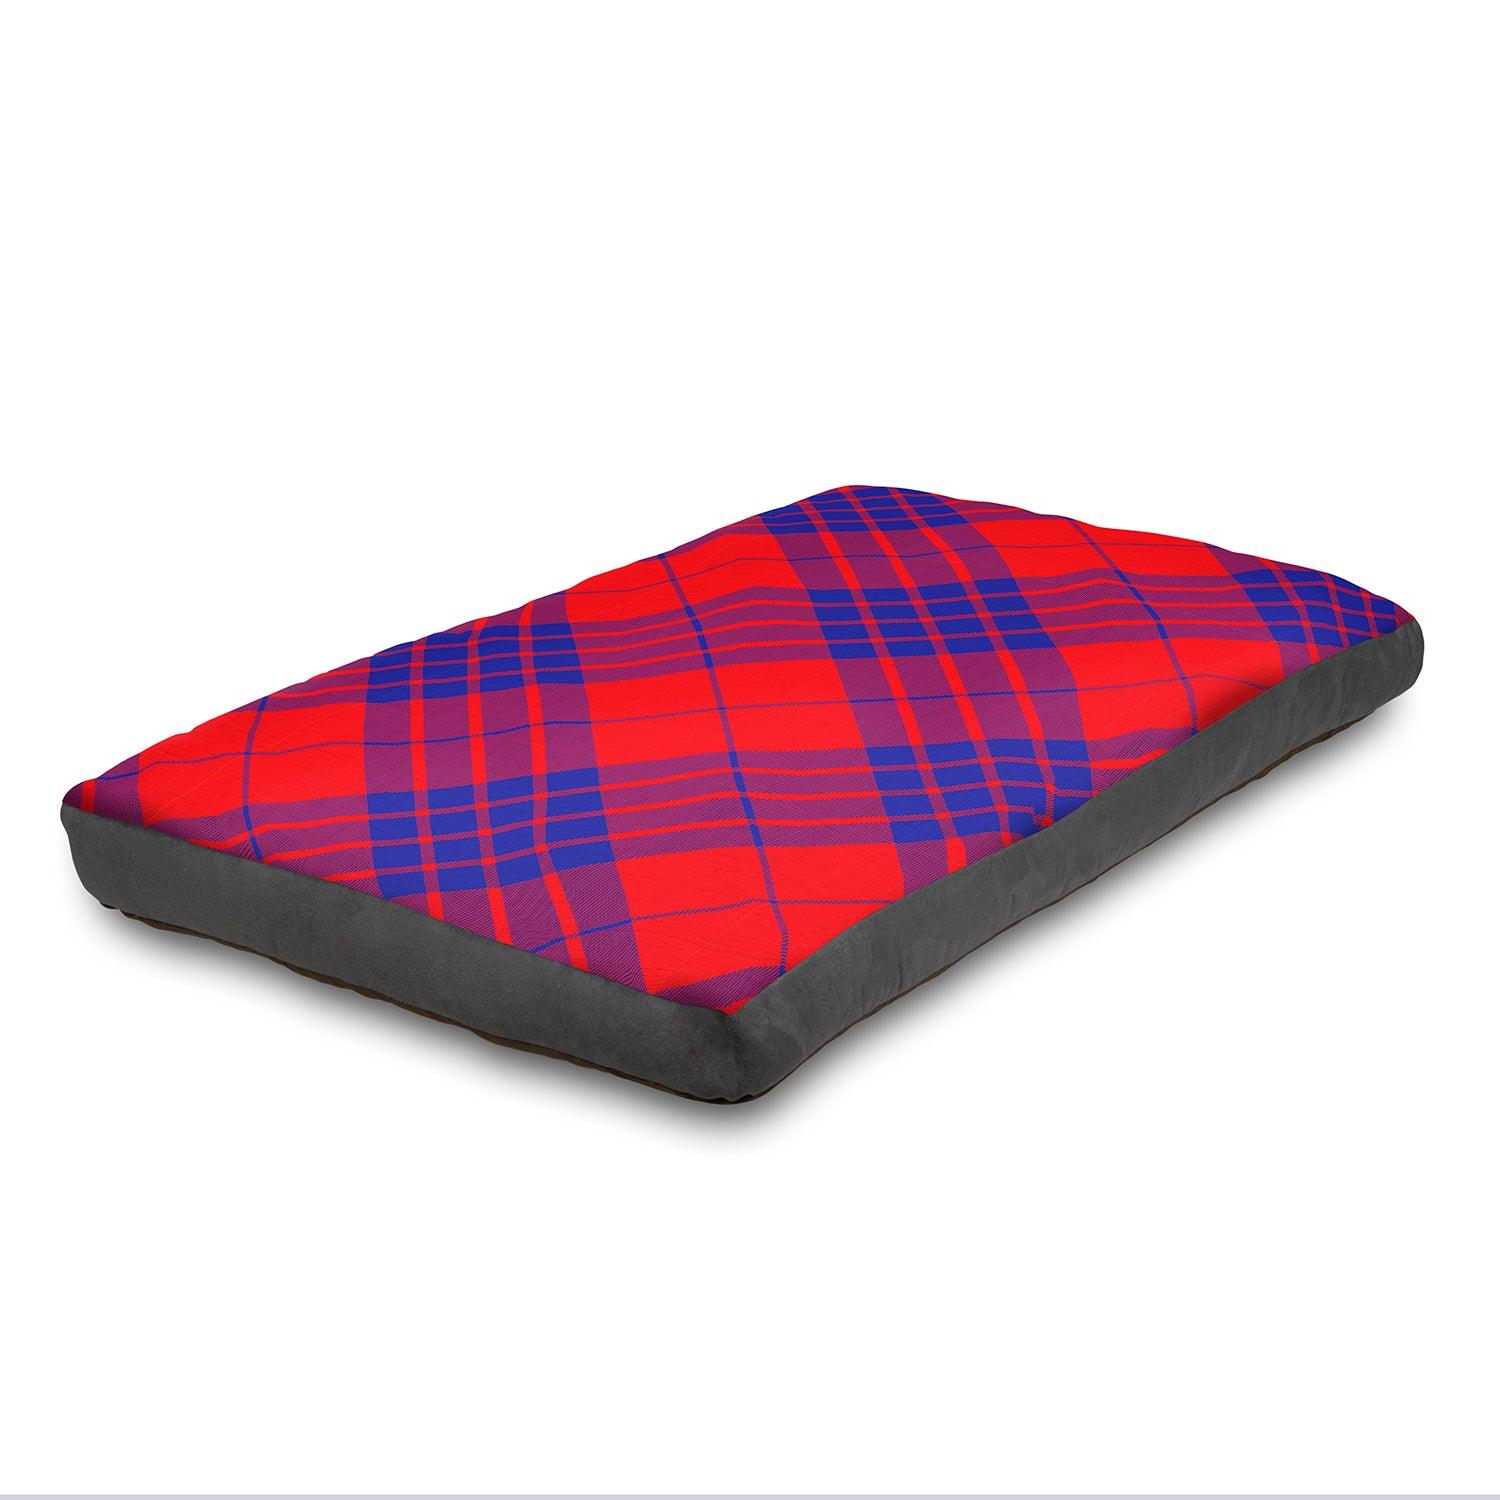 View Super Comfy Dog Bed Soft and Fluffy with Washable Cover Small 75 x 50 cm Red information